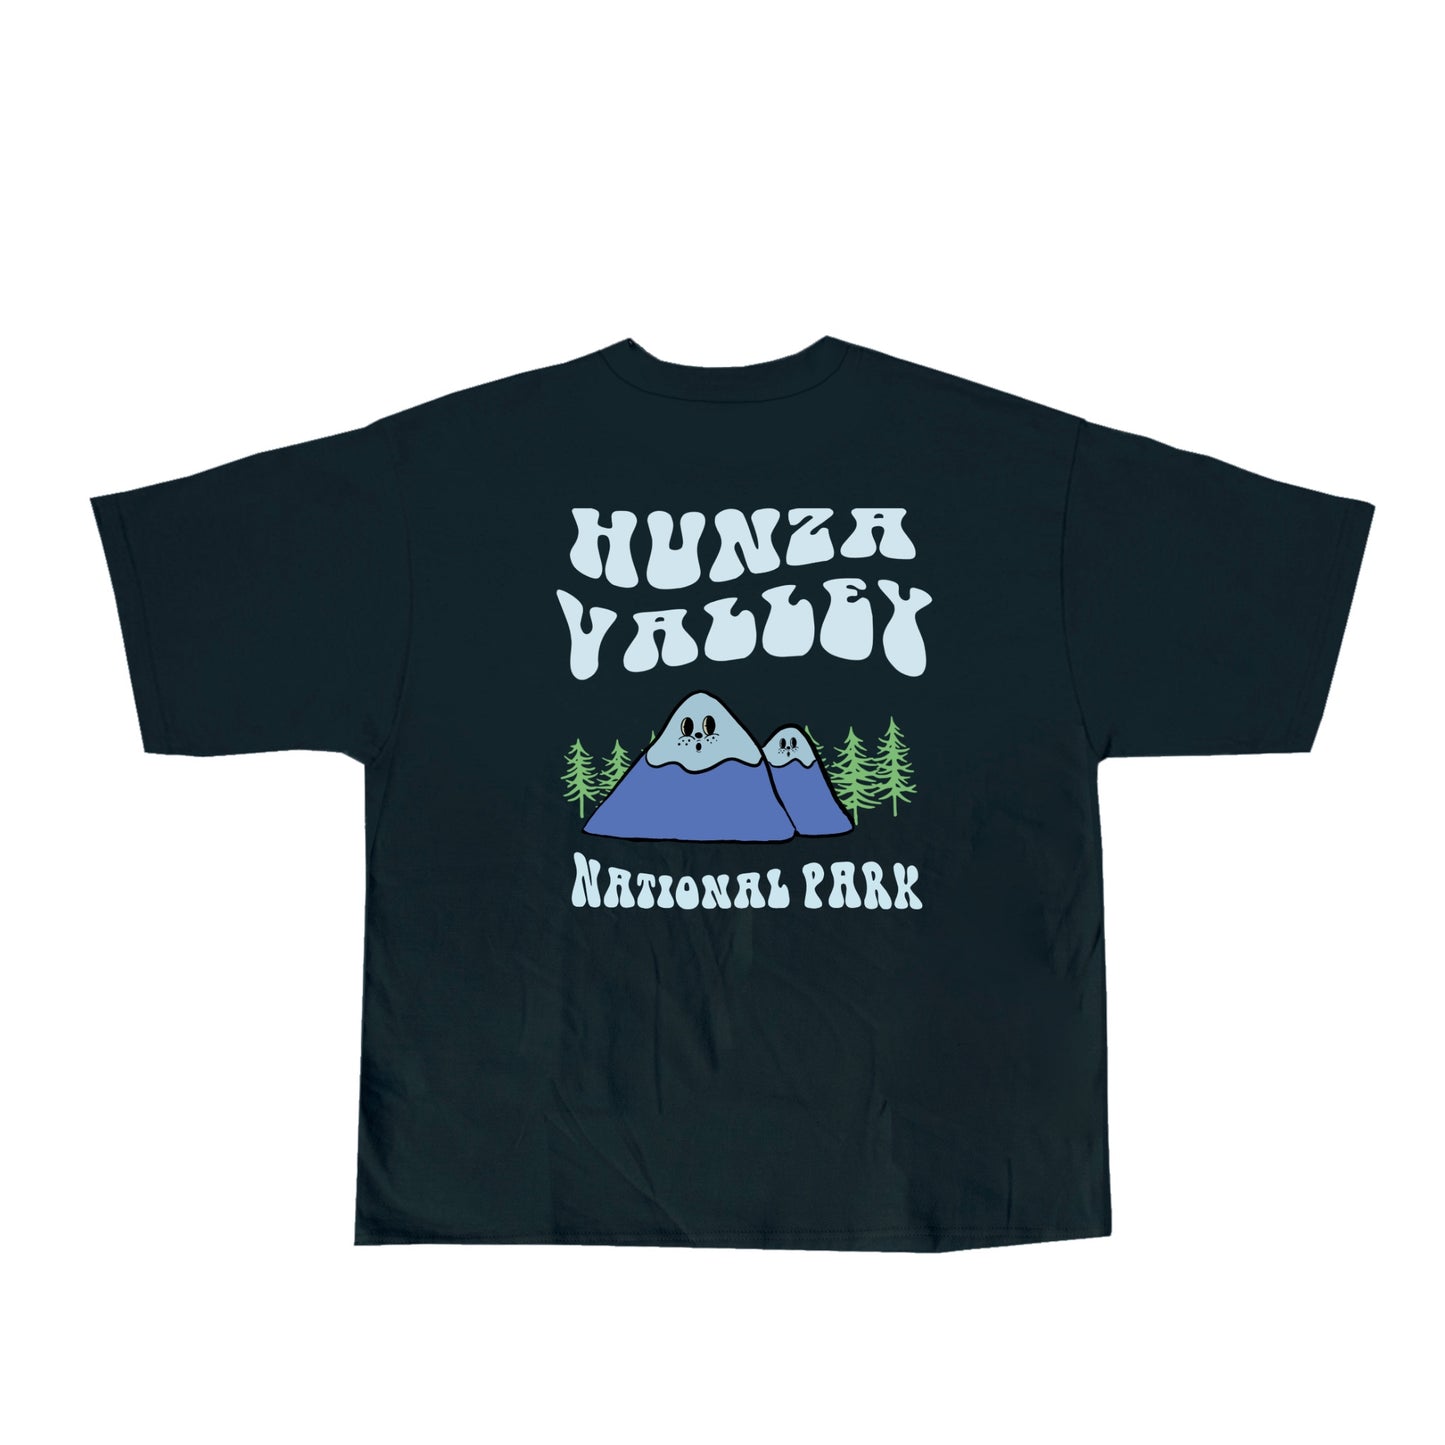 Valley National Park Tee